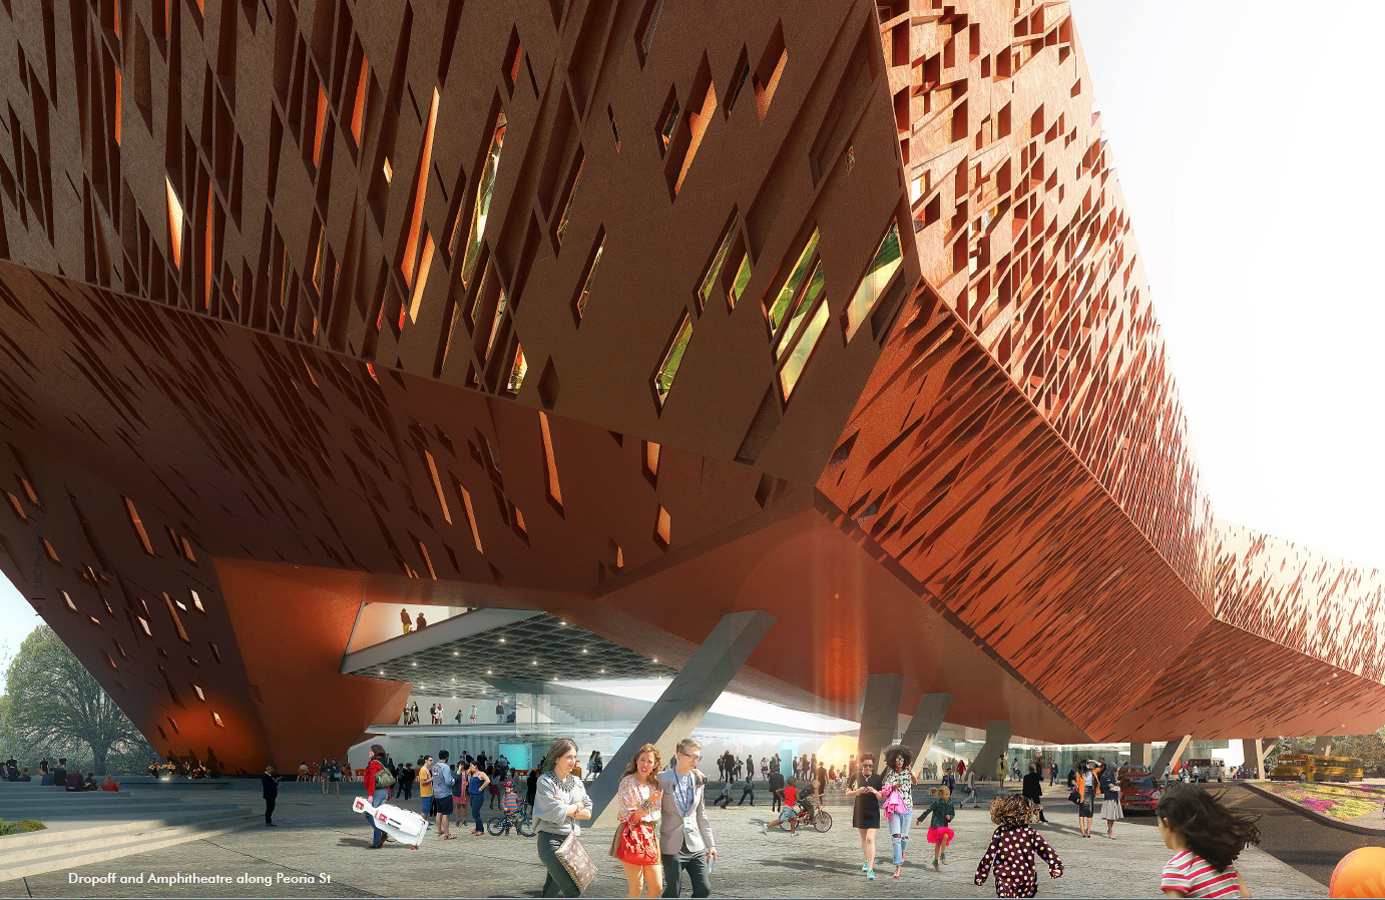 Rendering of an orange building with a perforated skin